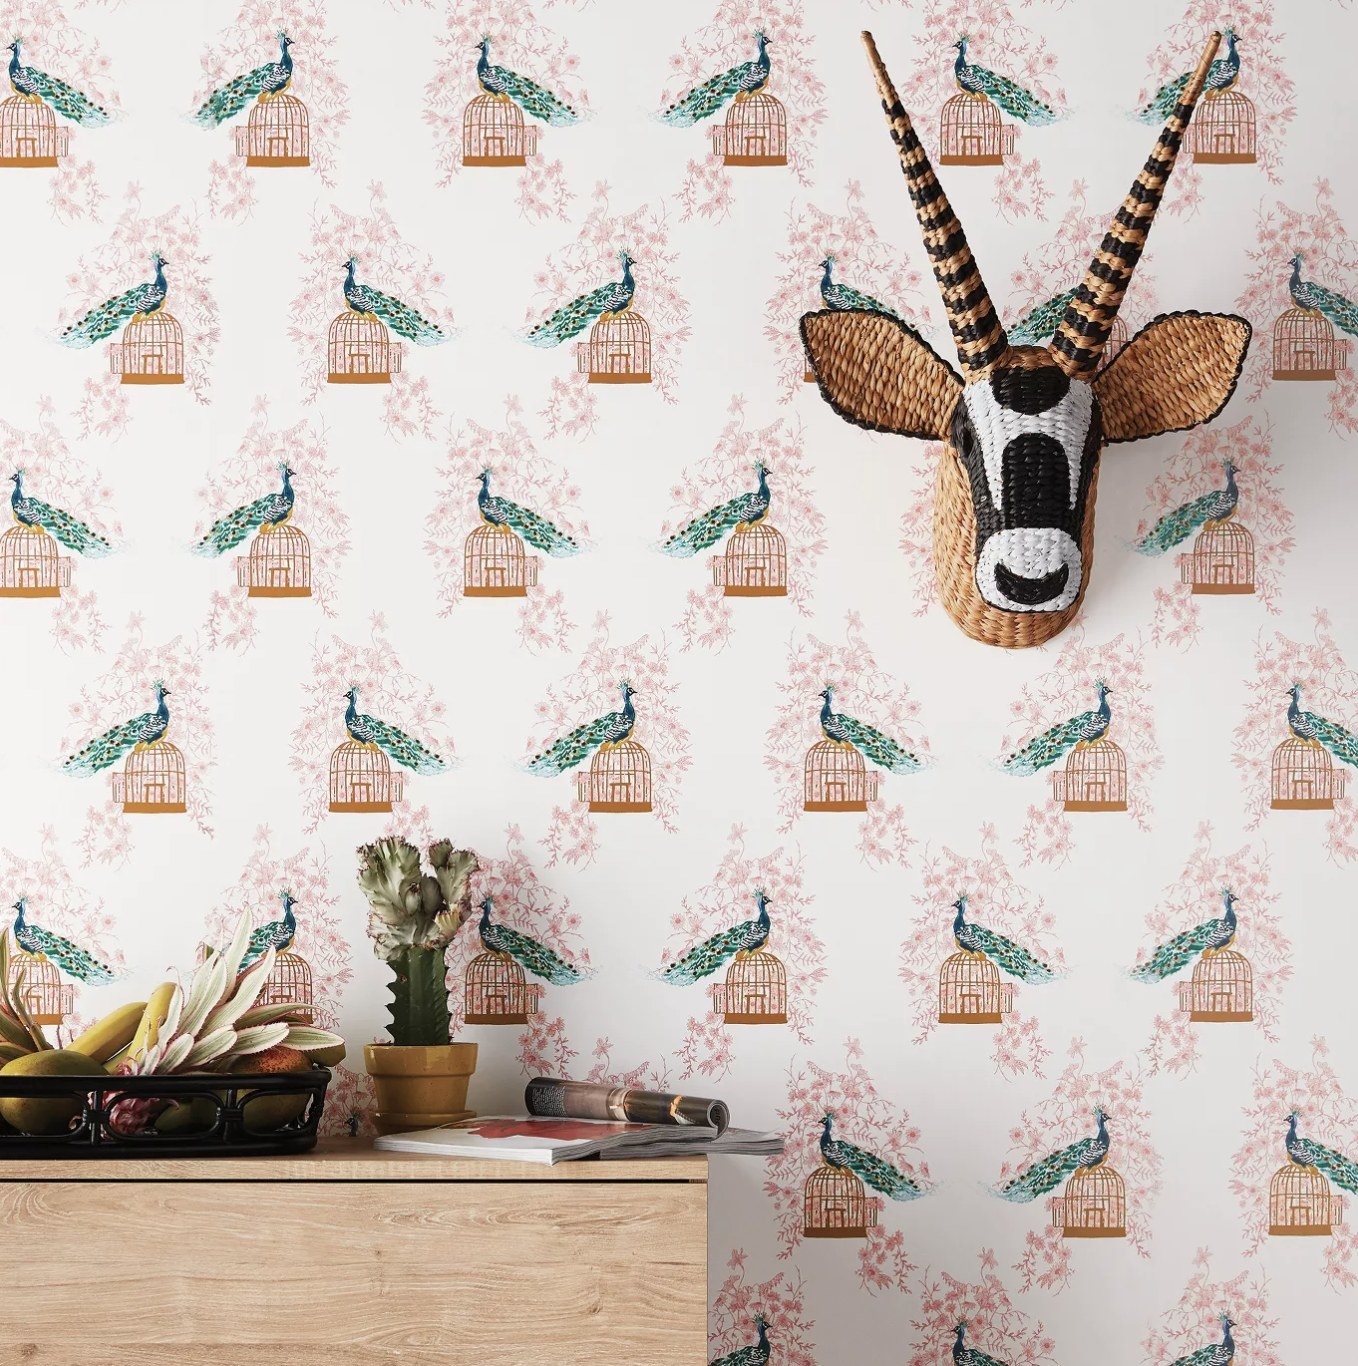 The wallpaper with illustrations of peacocks resting on gold cages 